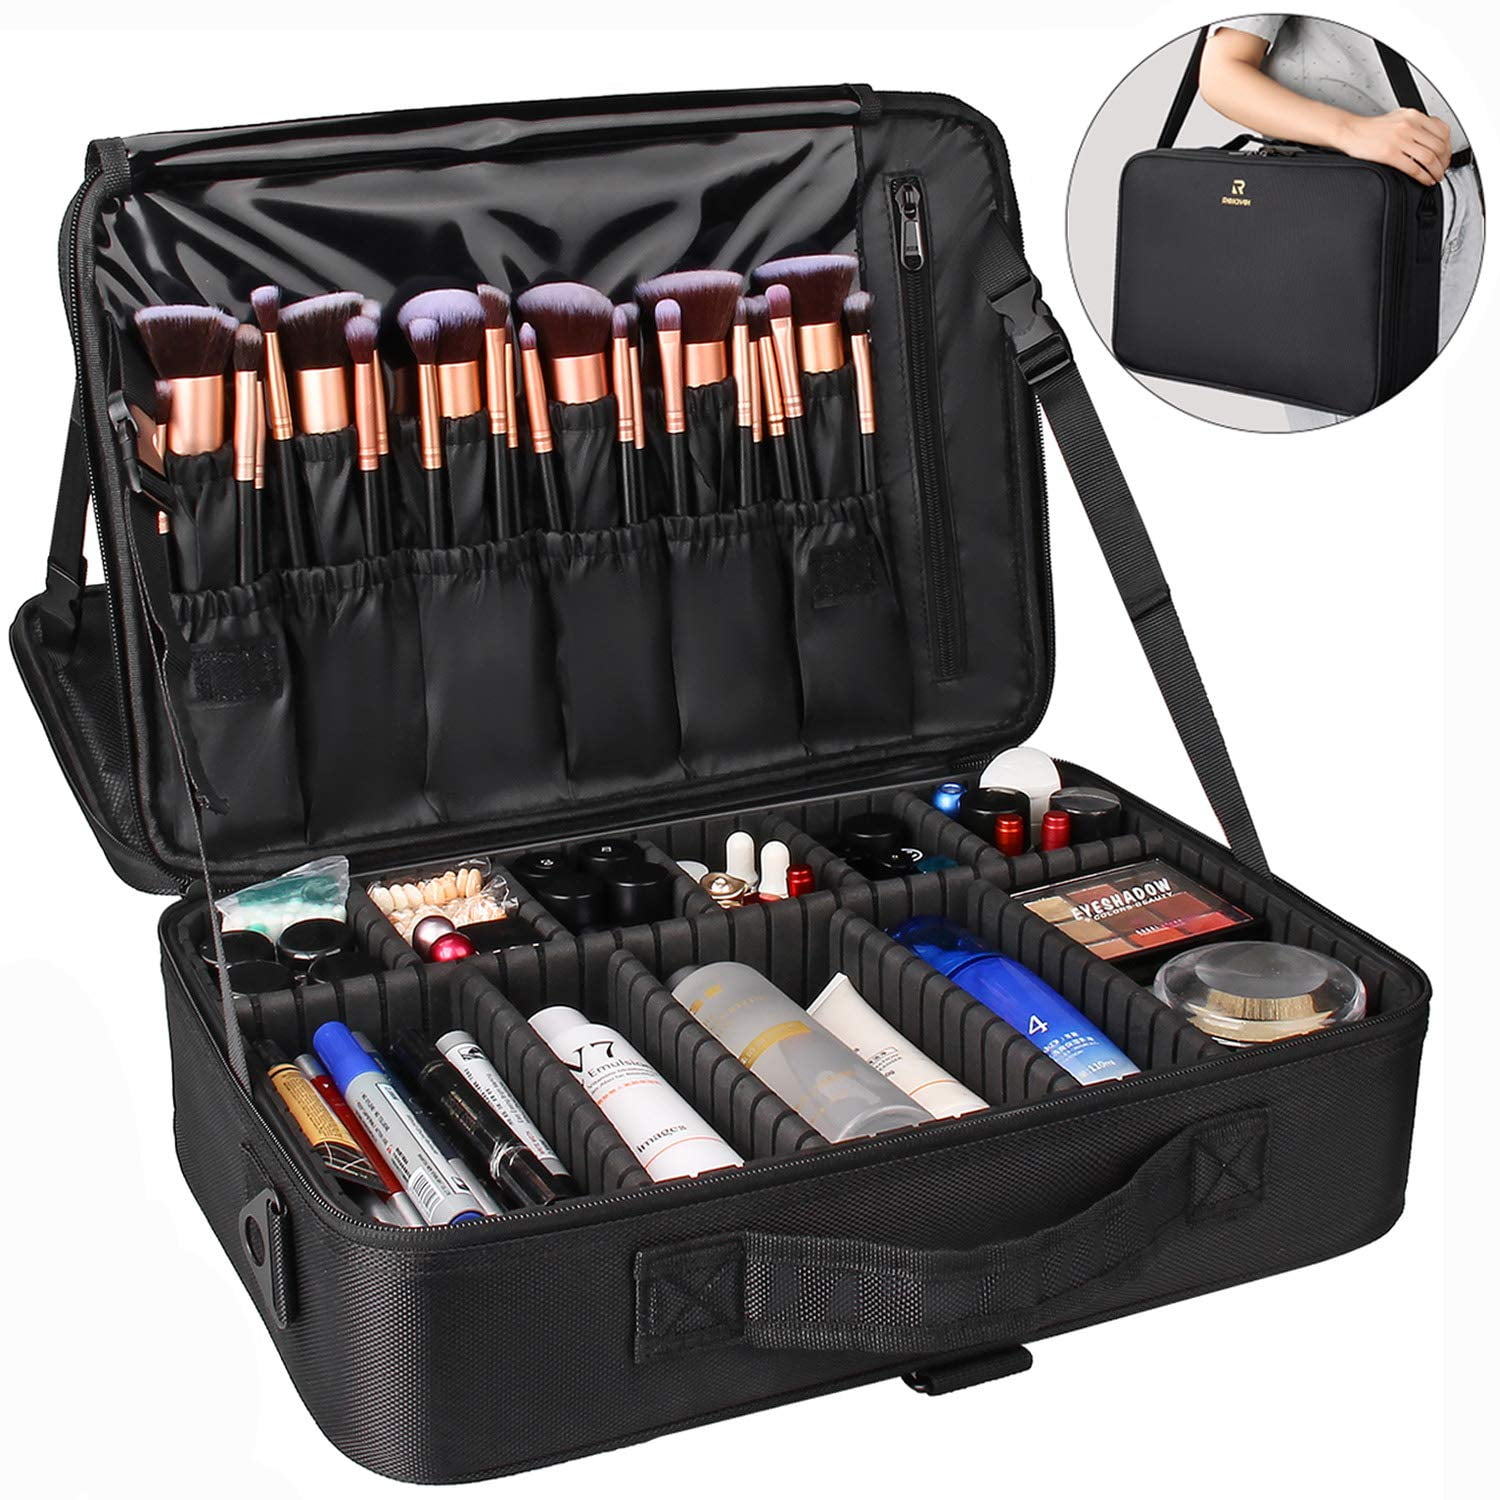 Makeup 3 Layer Large Size Professional Cosmetic Organizer Make Up Artist with Adjustable - Black - Walmart.com